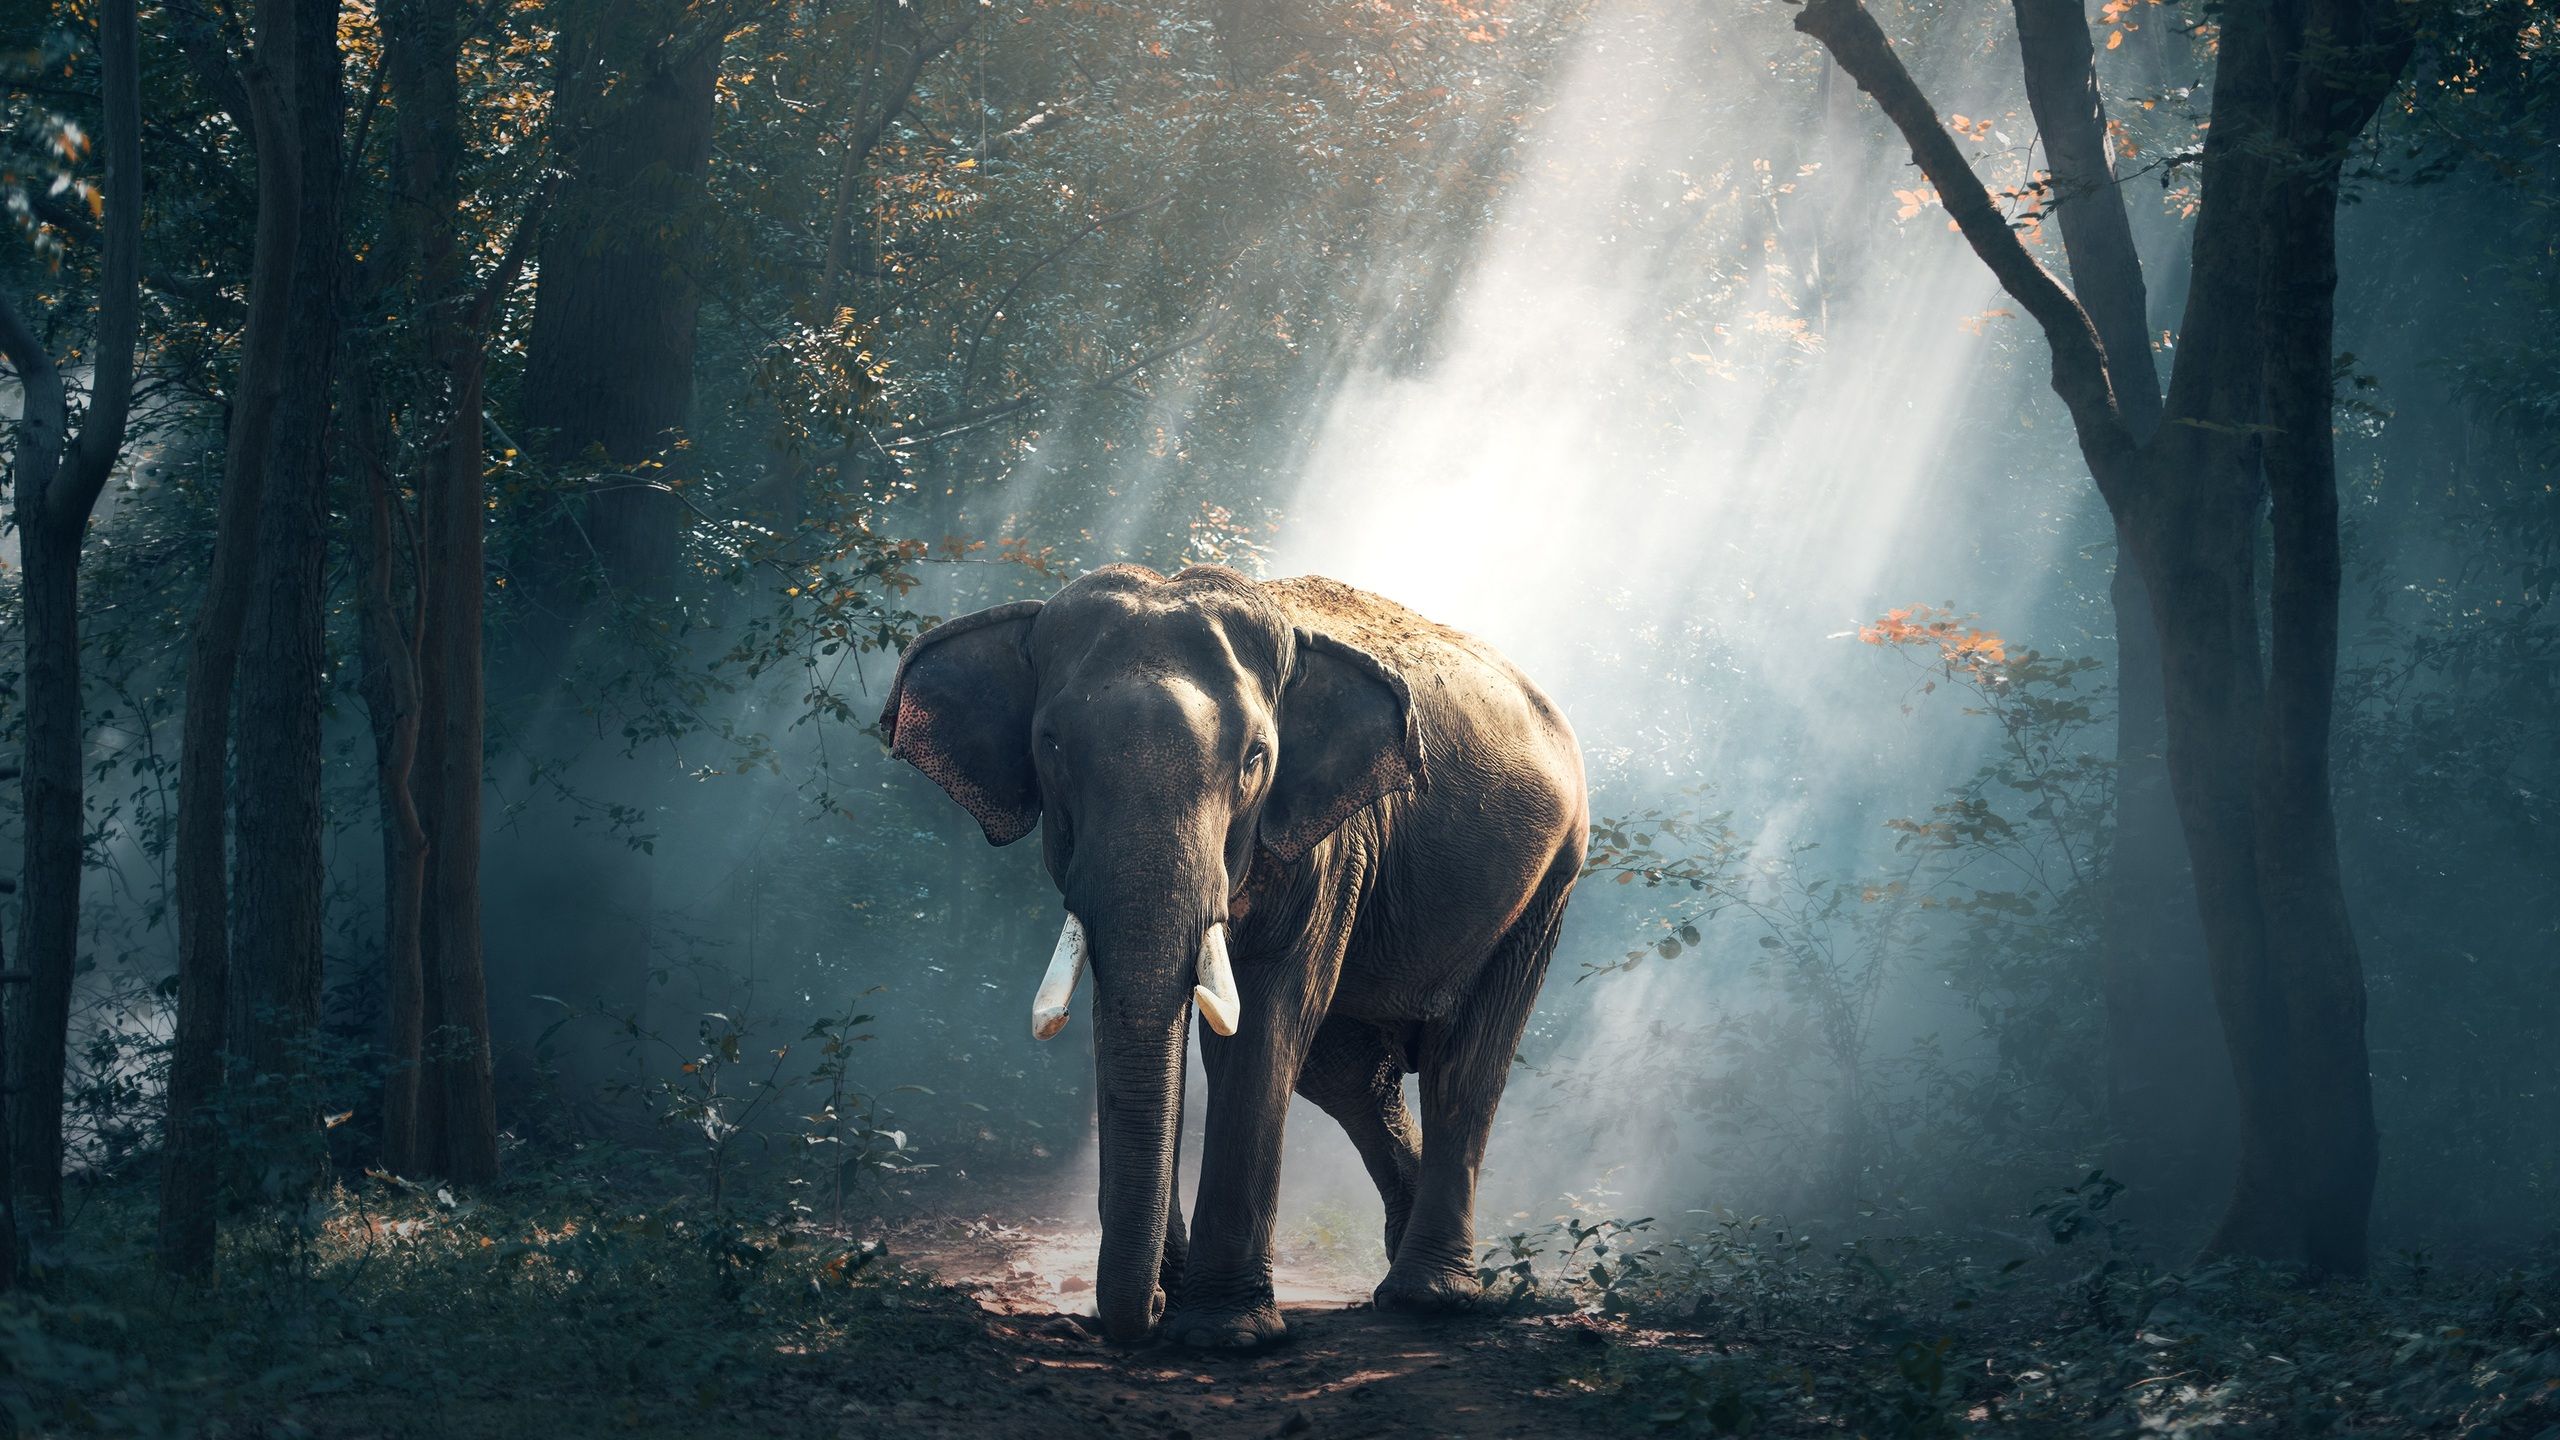 Elephant 1440P Resolution HD 4k Wallpaper, Image, Background, Photo and Picture